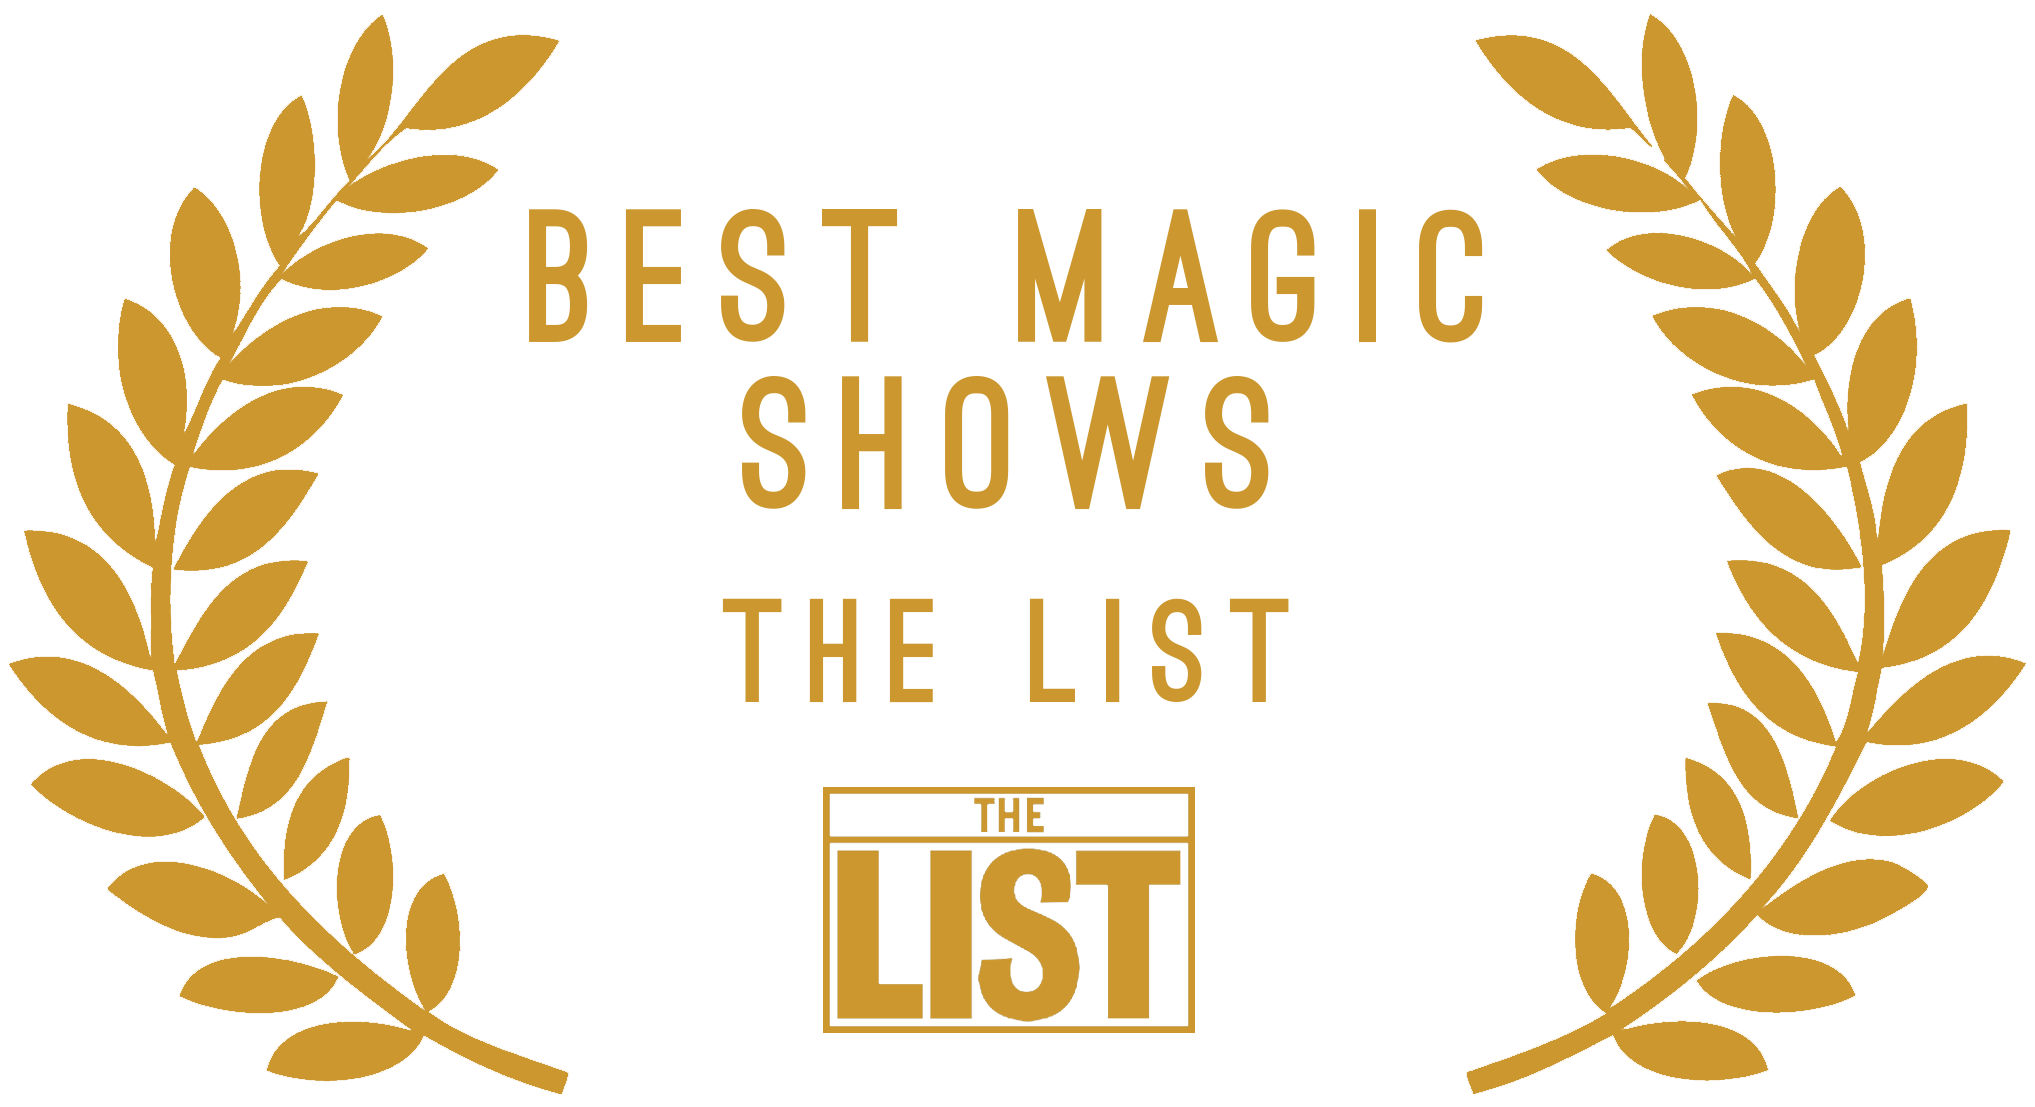 The best magic show award voted for by the list at underbelly southbank